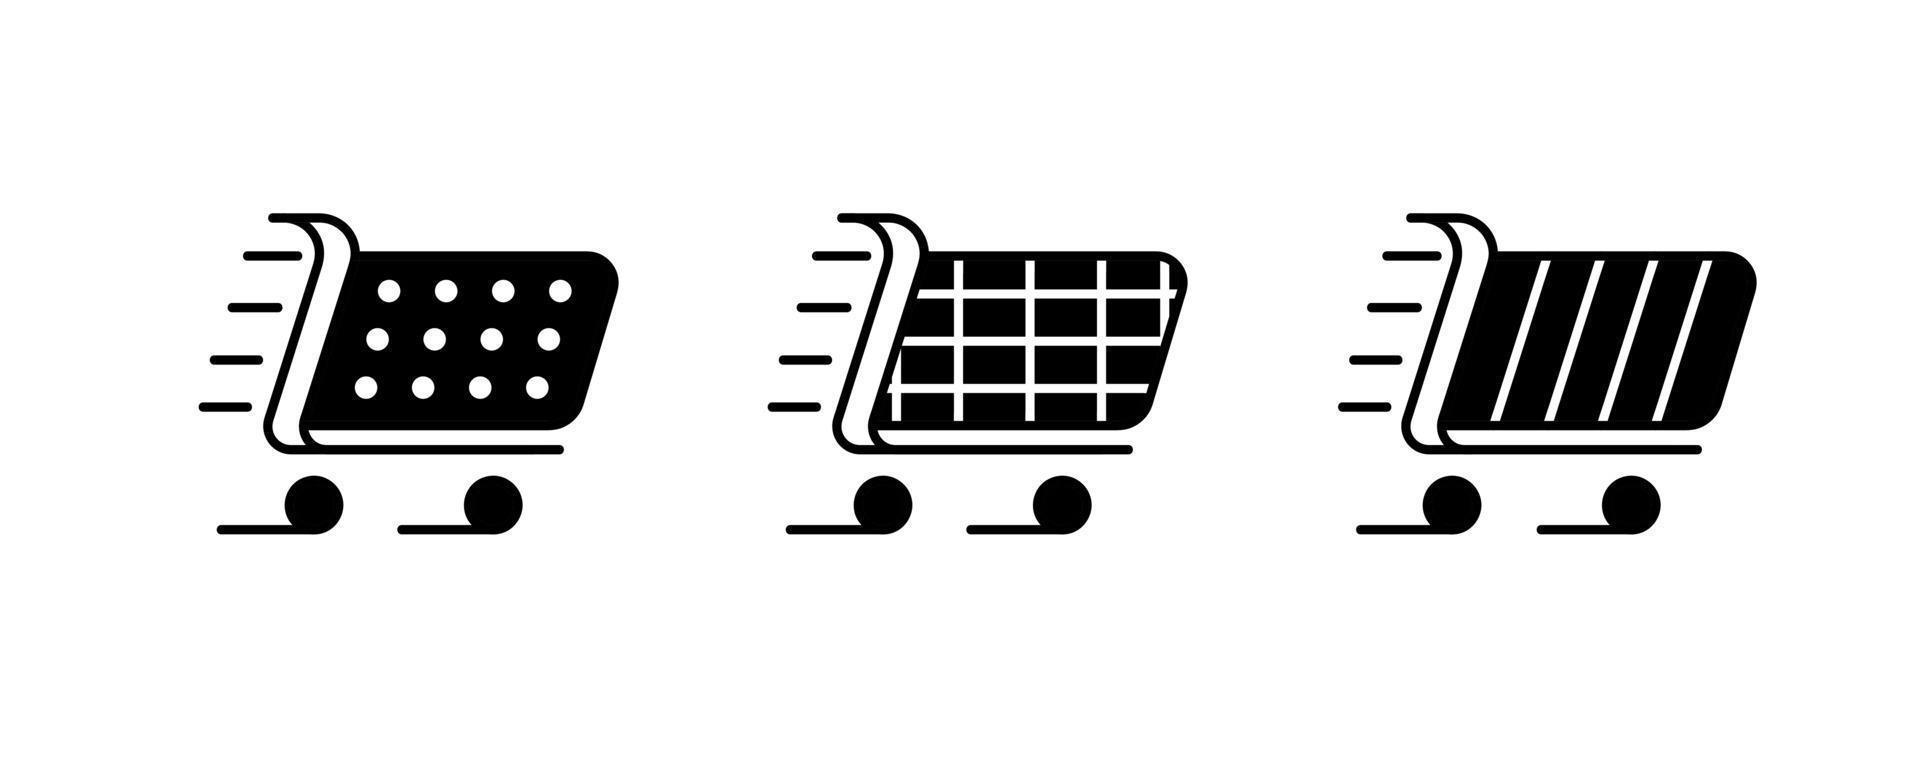 Set of 3 different shopping cart icons. vector